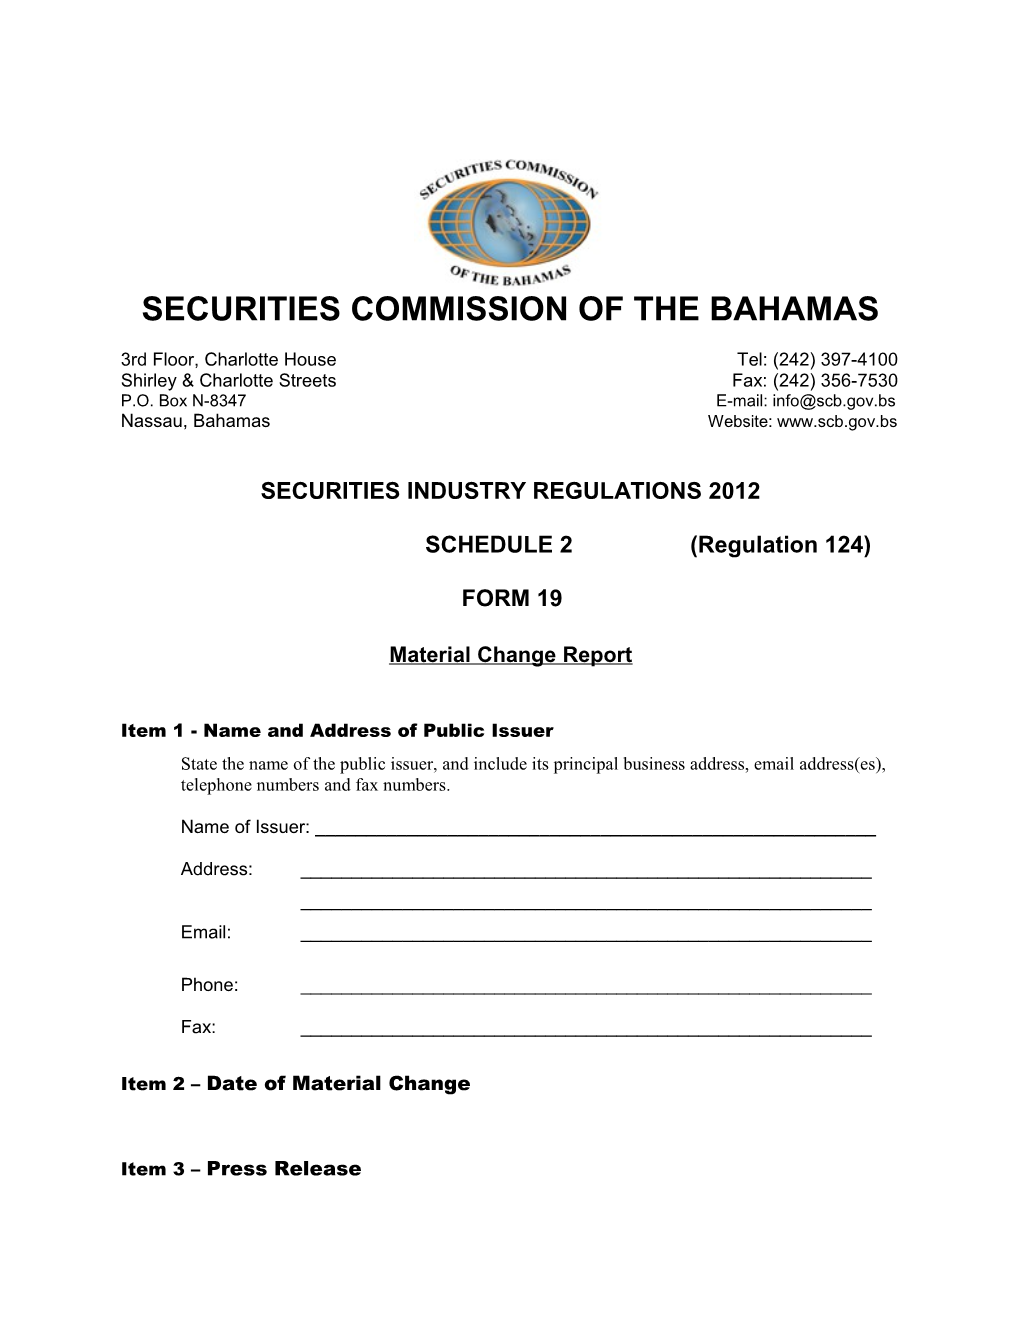 Securities Commission of the Bahamas